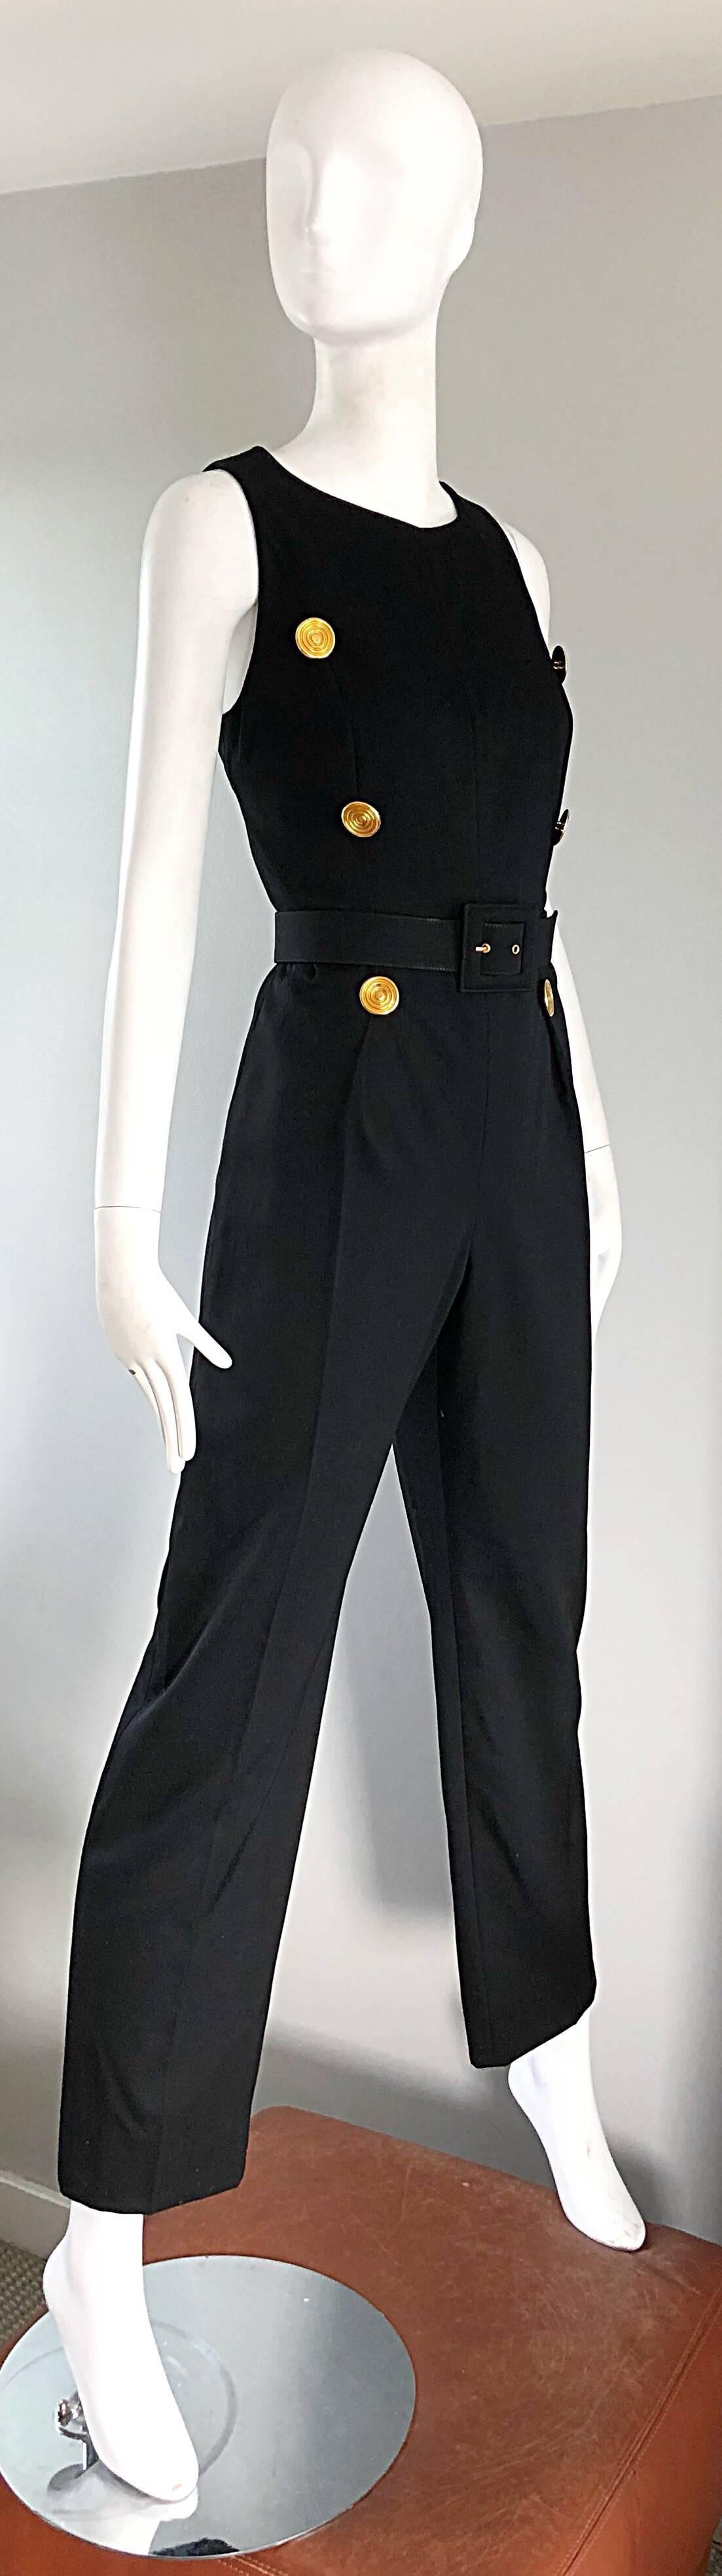 Women's Alexander McQueen for Givenchy Couture Vintage Black Jumpsuit + Cropped Jacket 